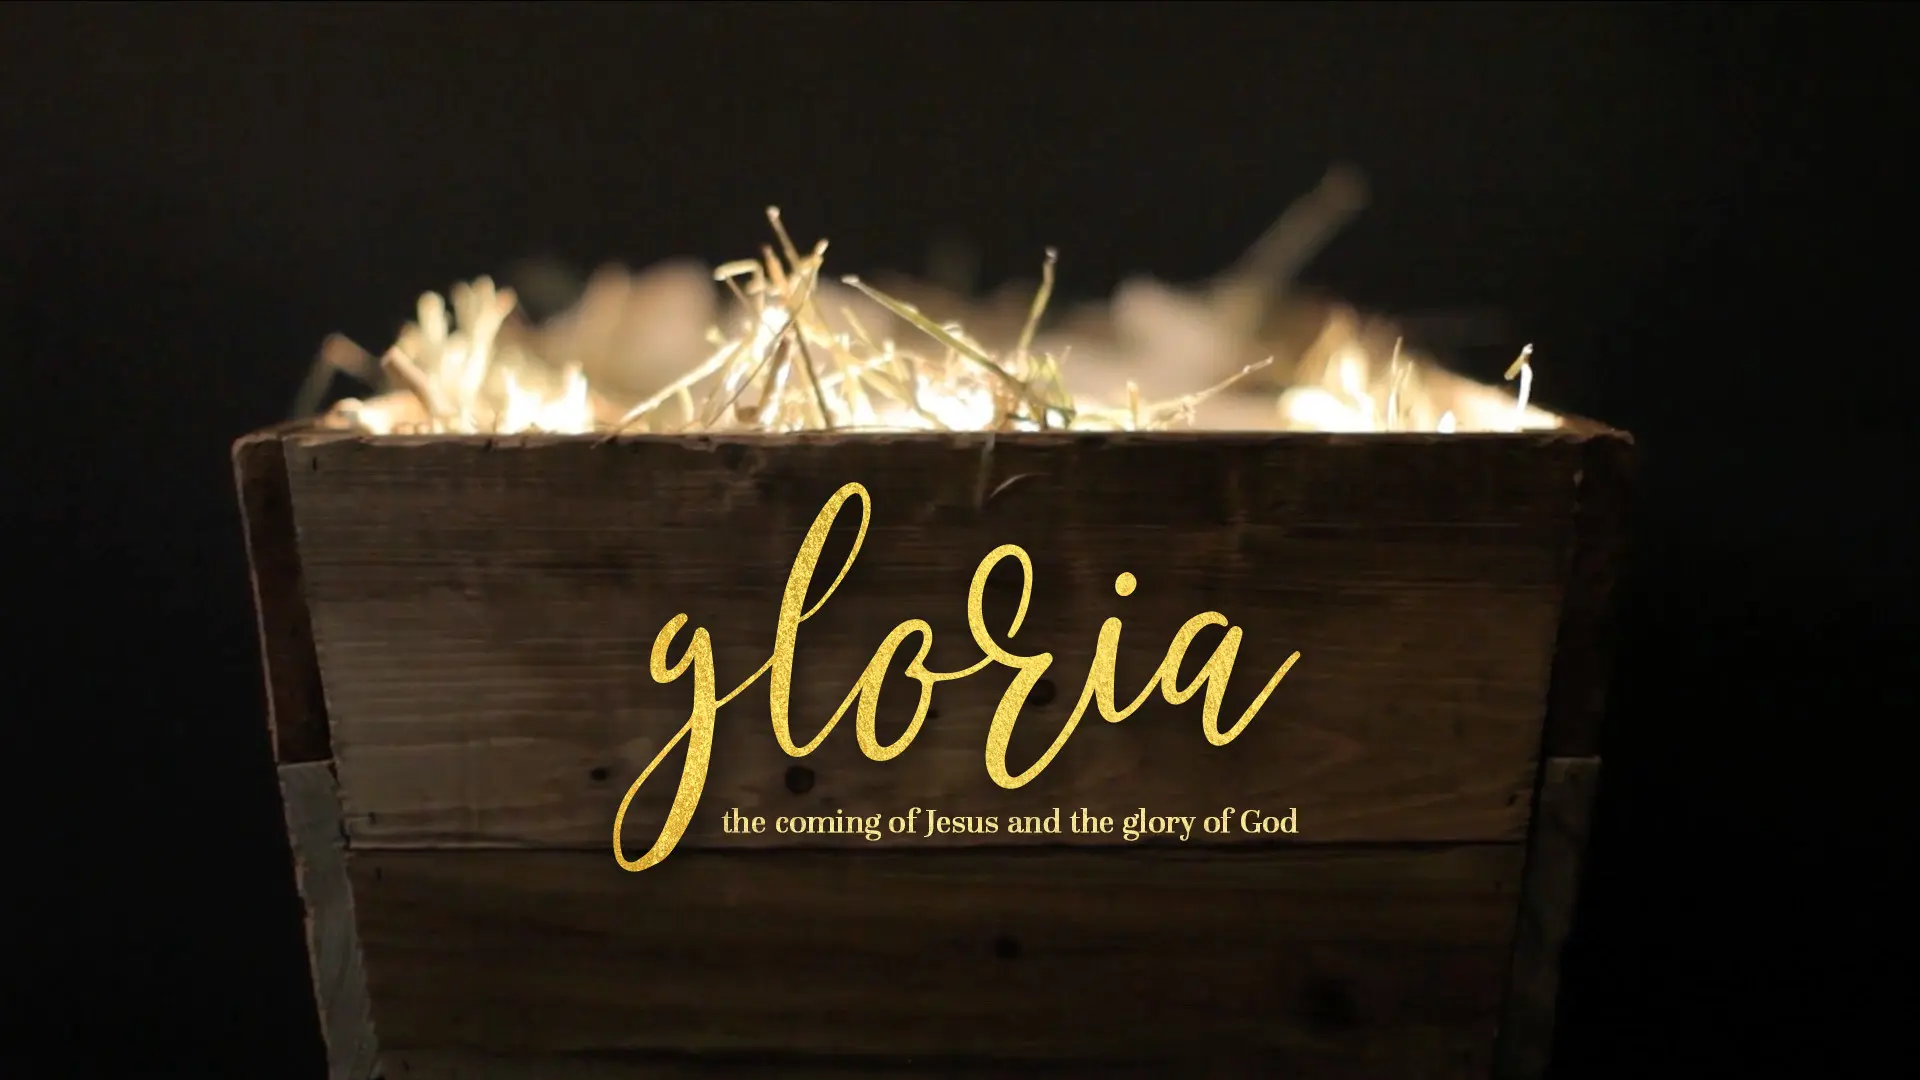 Featured image for “Gloria”